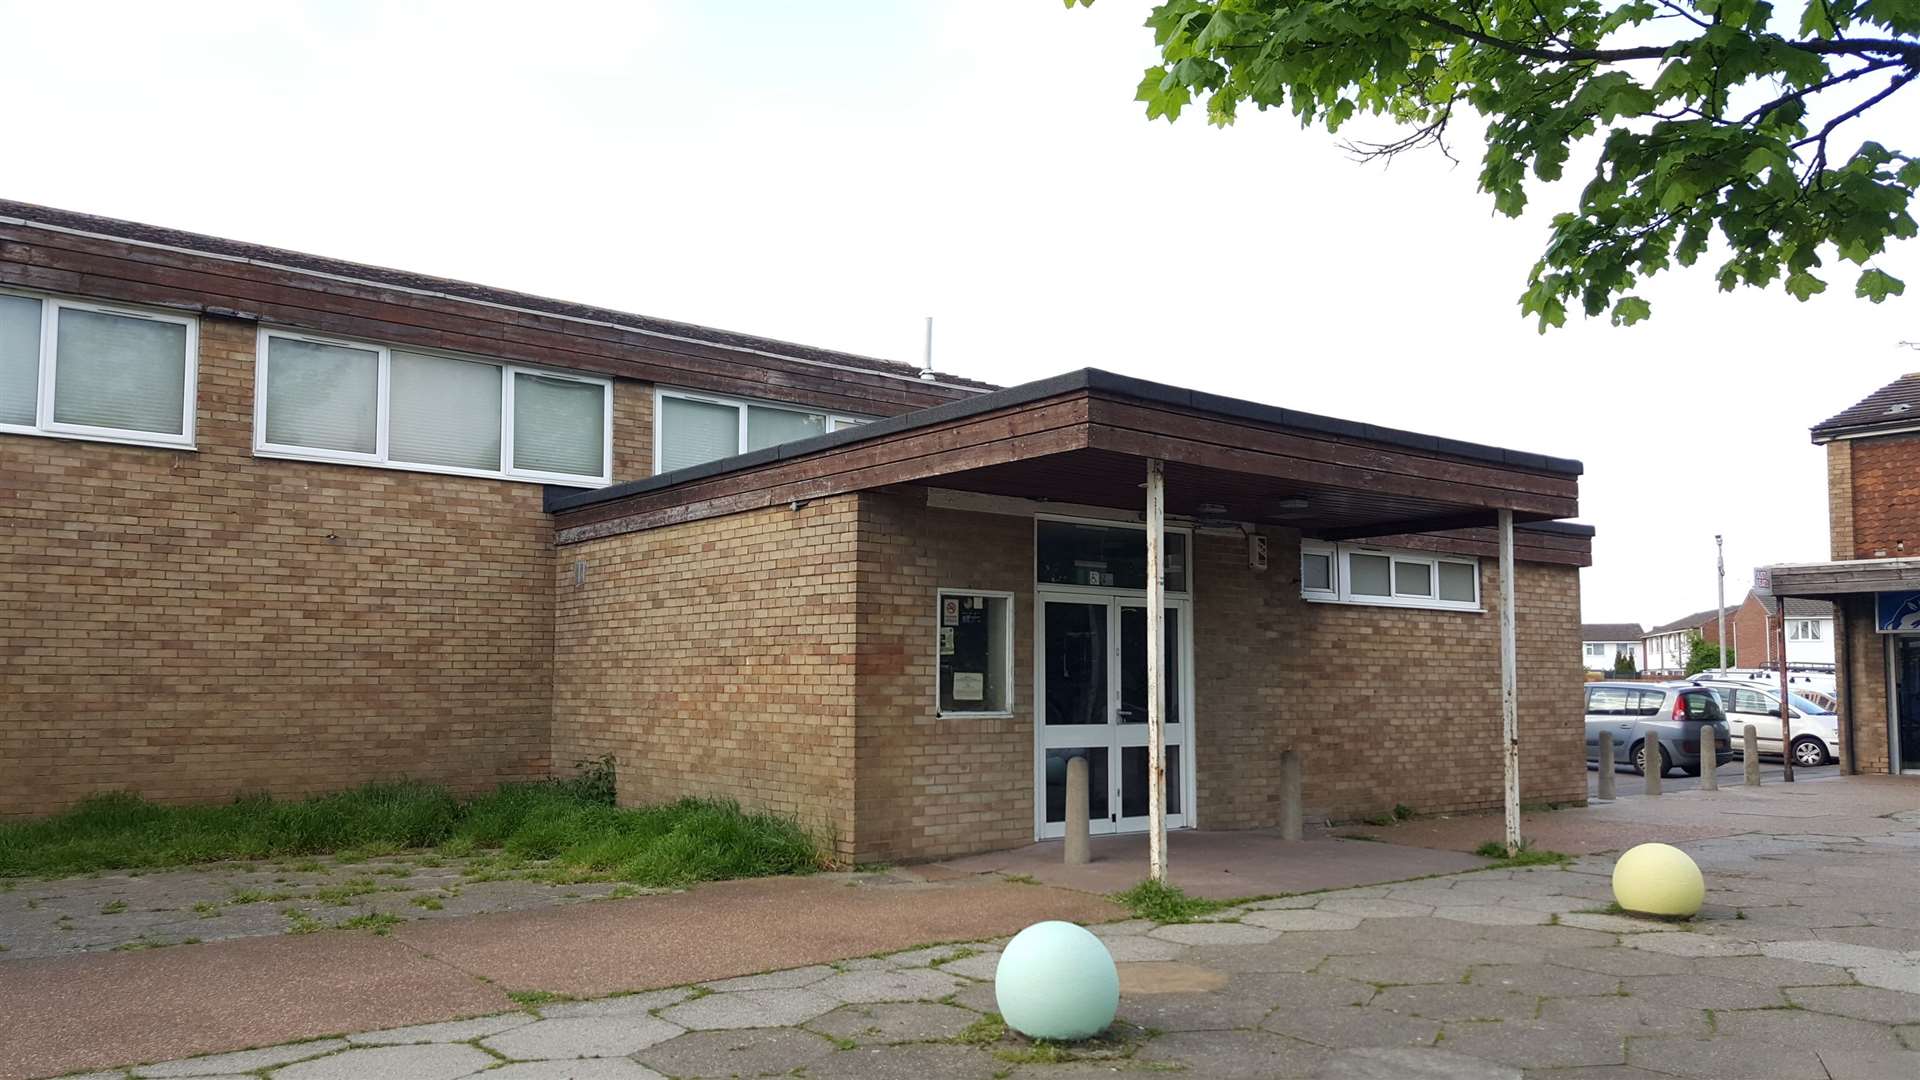 The Bockhanger Community Centre before it was demolished in April